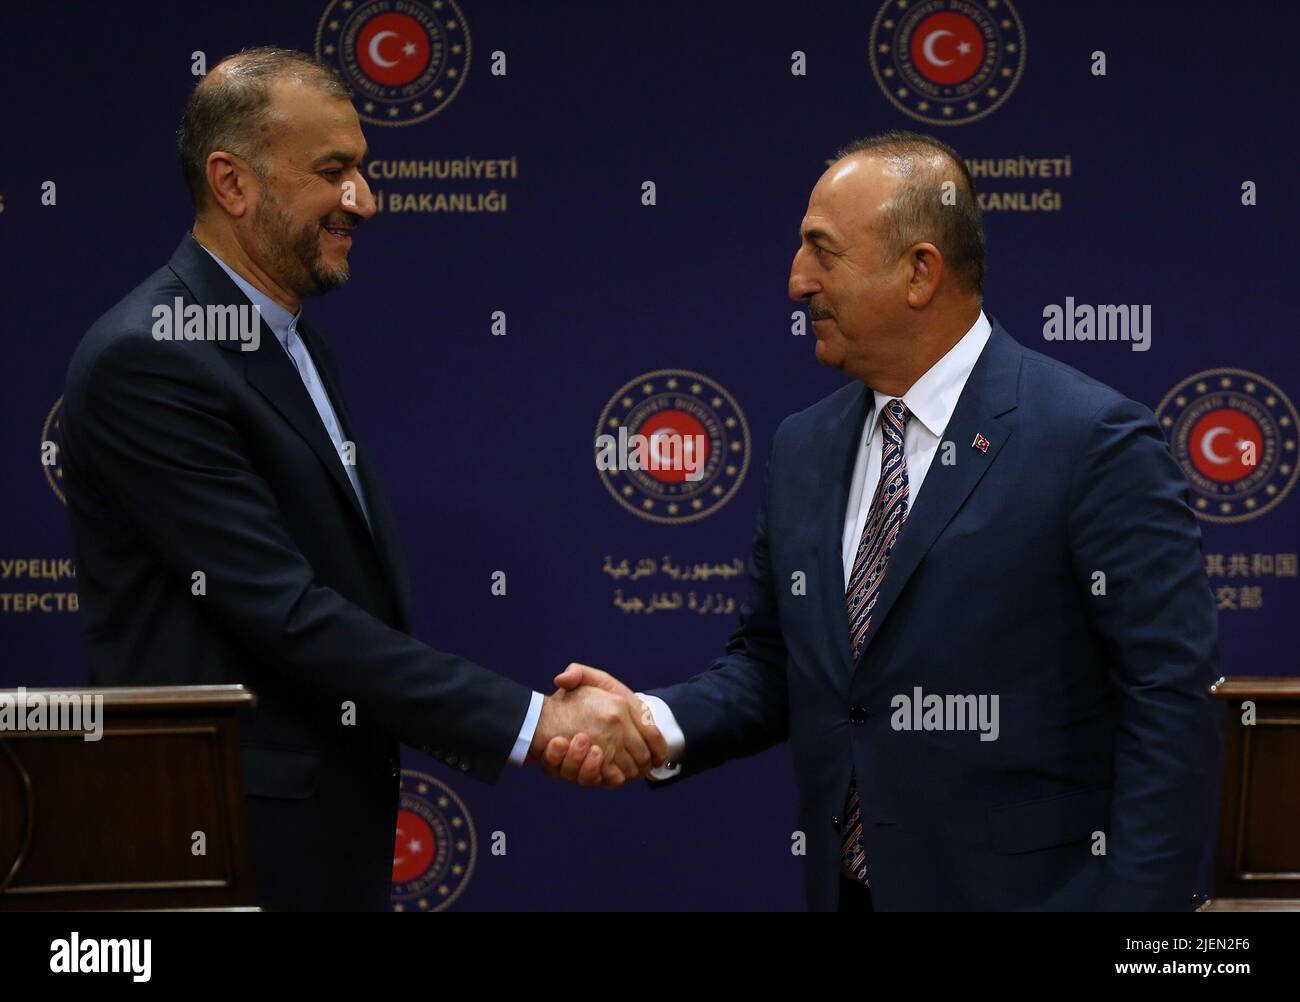 Ankara, Turkey. 27th June, 2022. Turkish Foreign Minister Mevlut Cavusoglu (R) and Iranian Foreign Minister Hossein Amir-Abdollahian shake hands at a joint press conference in Ankara, Turkey, on June 27, 2022. Turkey is against the unilateral sanctions on Iran, Turkish Foreign Minister Mevlut Cavusoglu said on Monday, voicing hopes for the nuclear deal to be restored. Credit: Mustafa Kaya/Xinhua/Alamy Live News Stock Photo